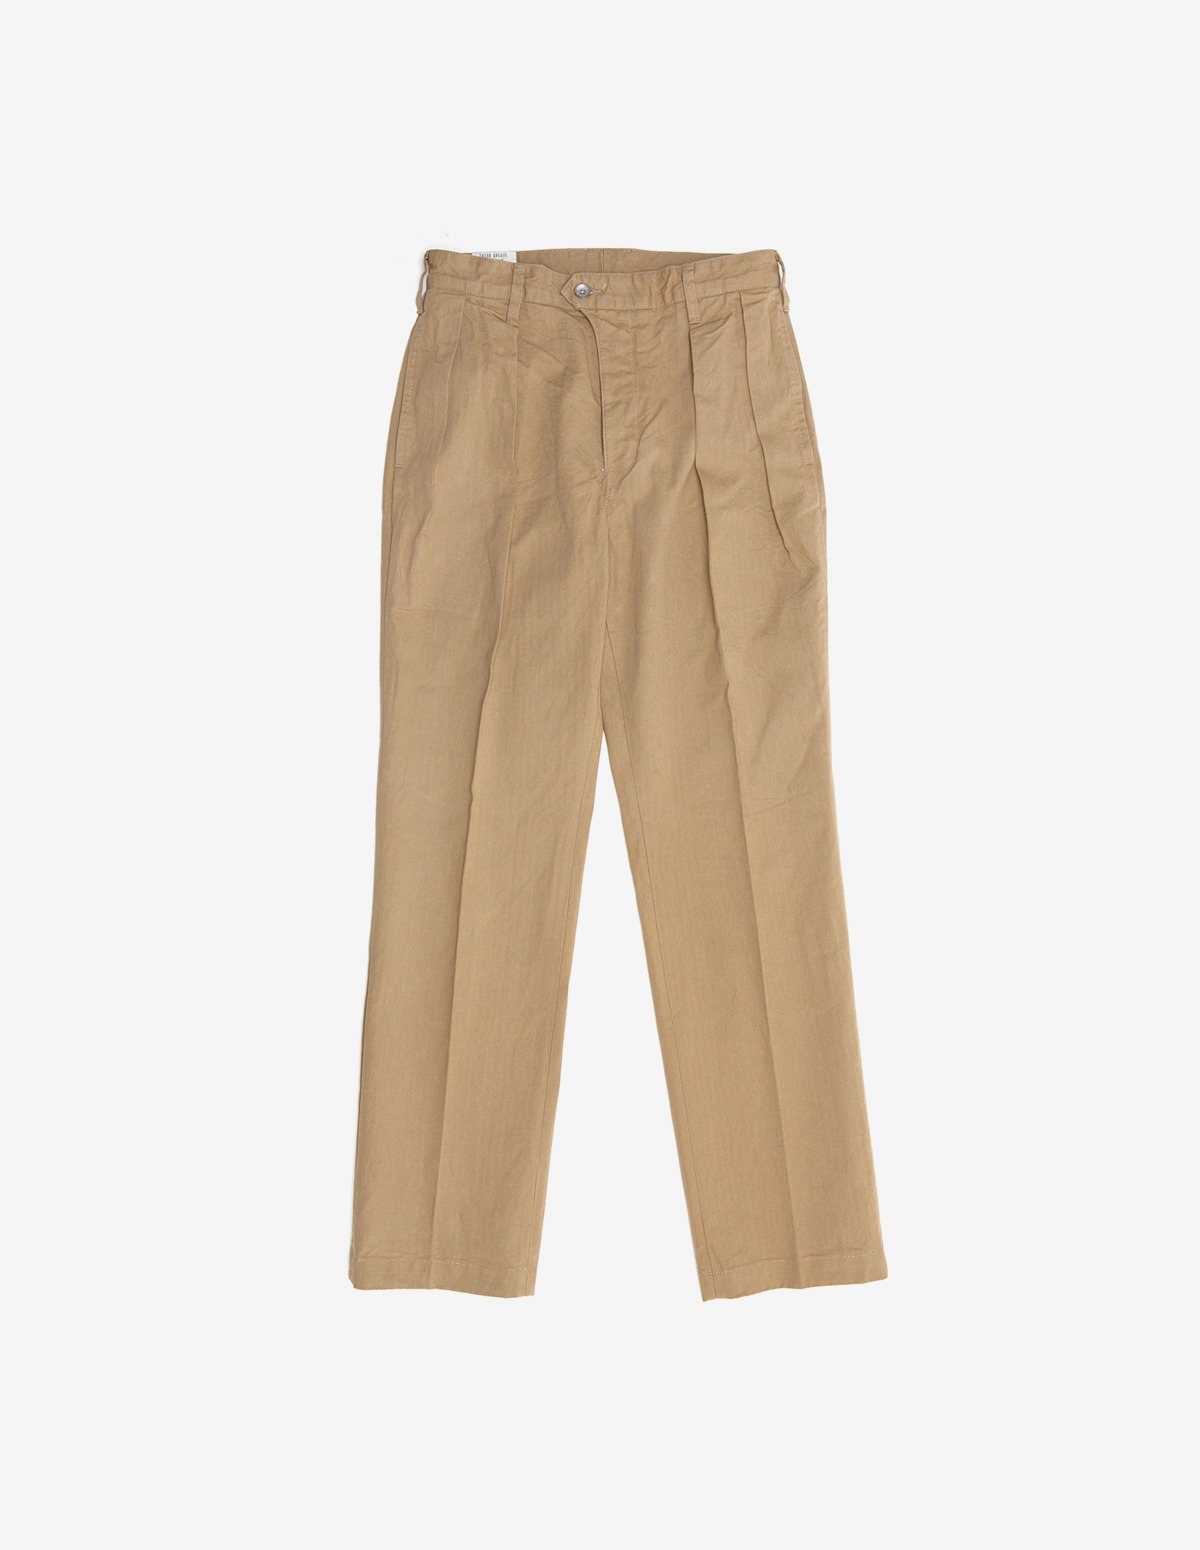 OR-1076B French Army Chino Trousers